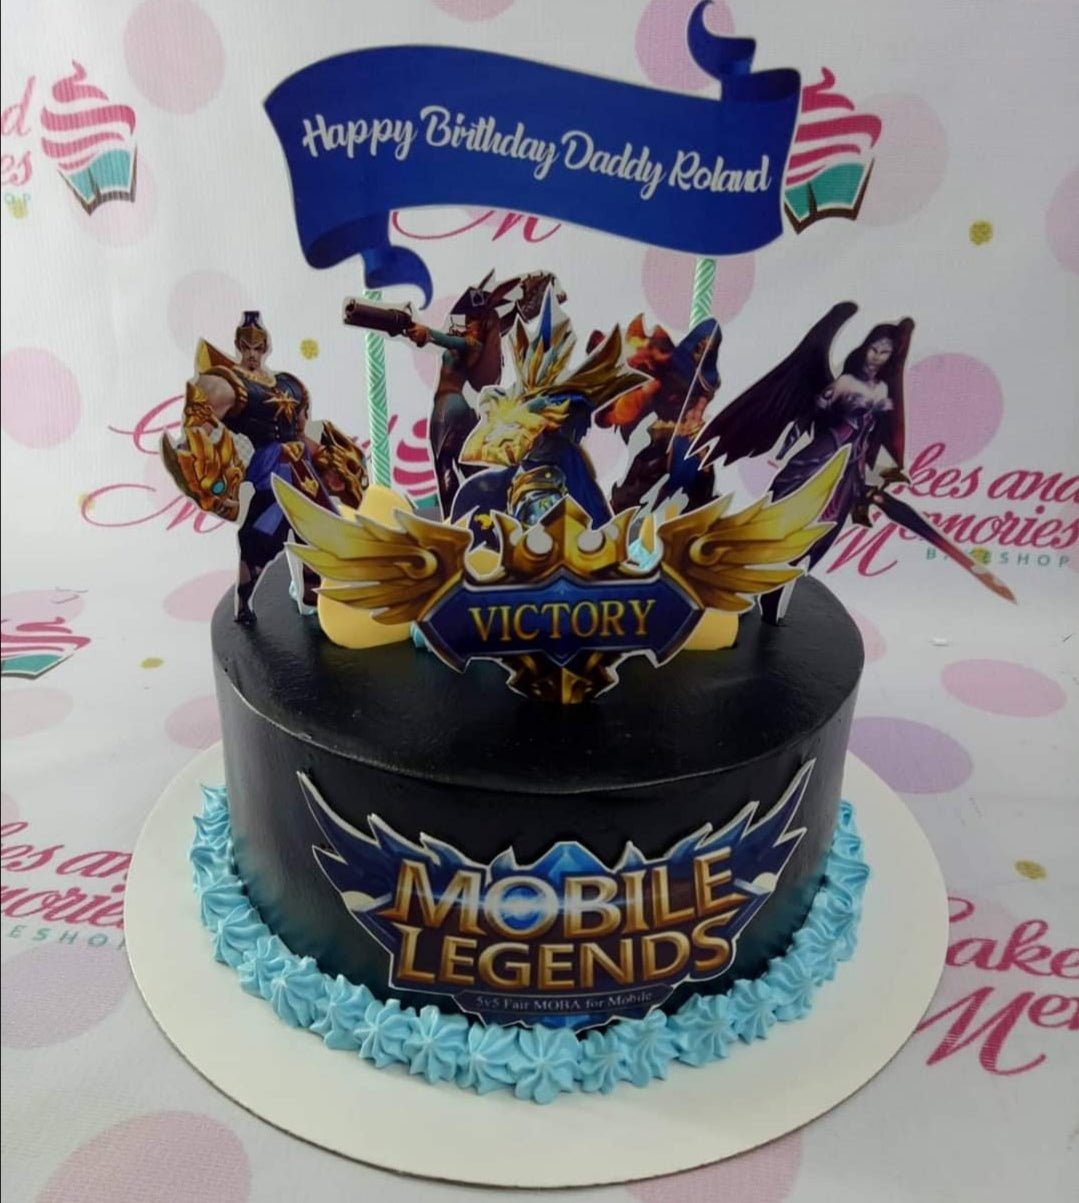 Mobile Legends Cake - 1113 – Cakes and Memories Bakeshop